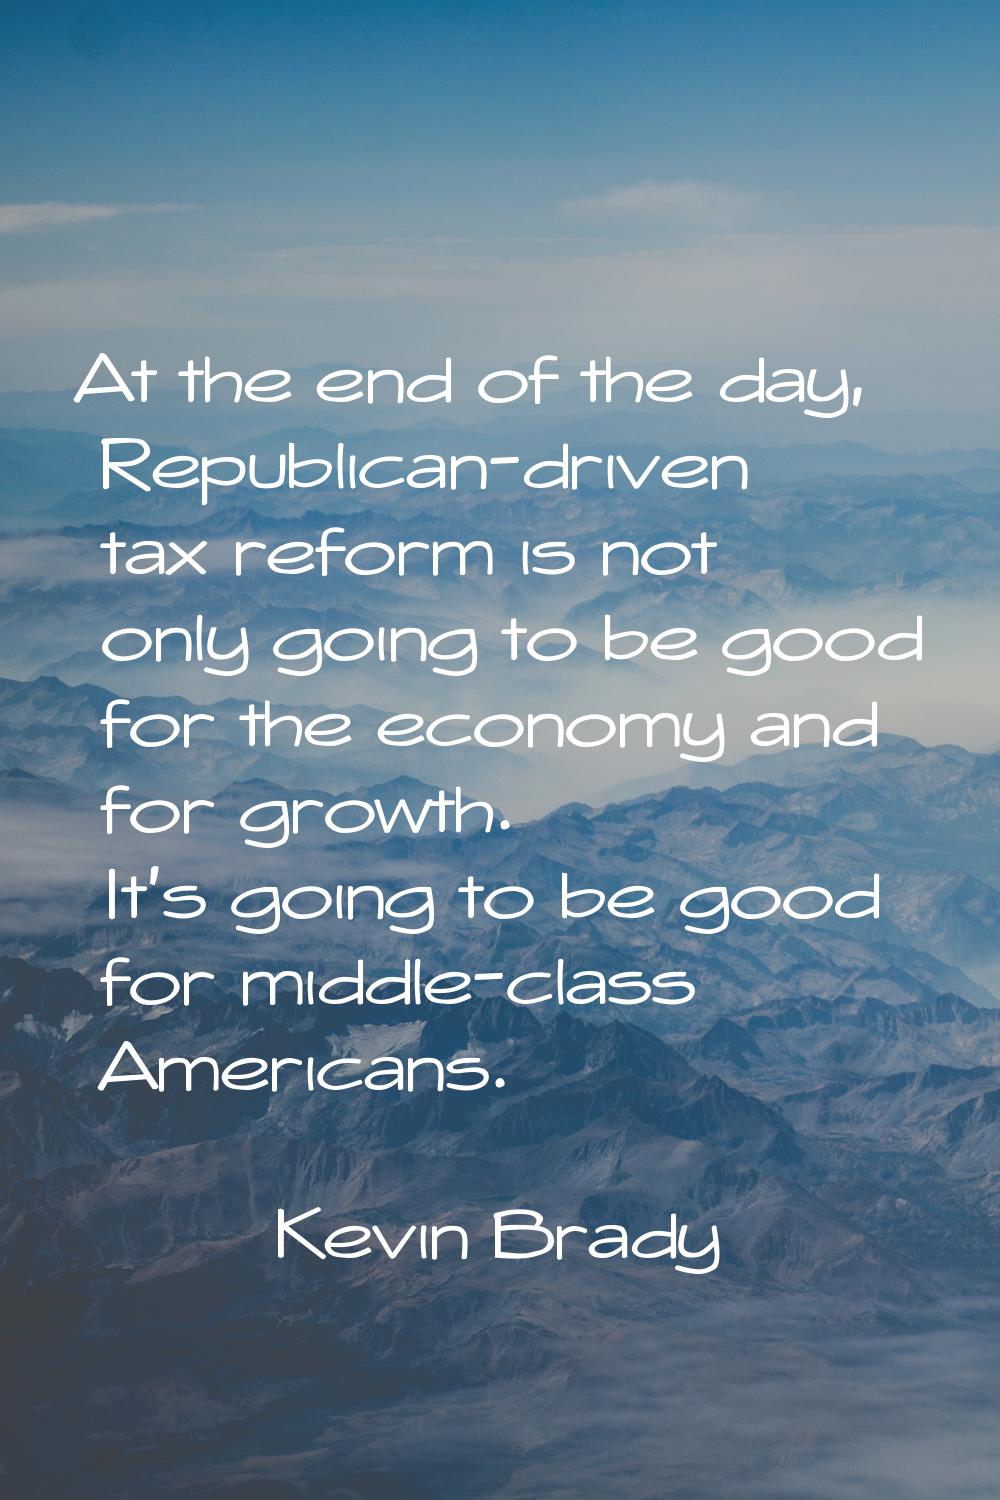 At the end of the day, Republican-driven tax reform is not only going to be good for the economy an